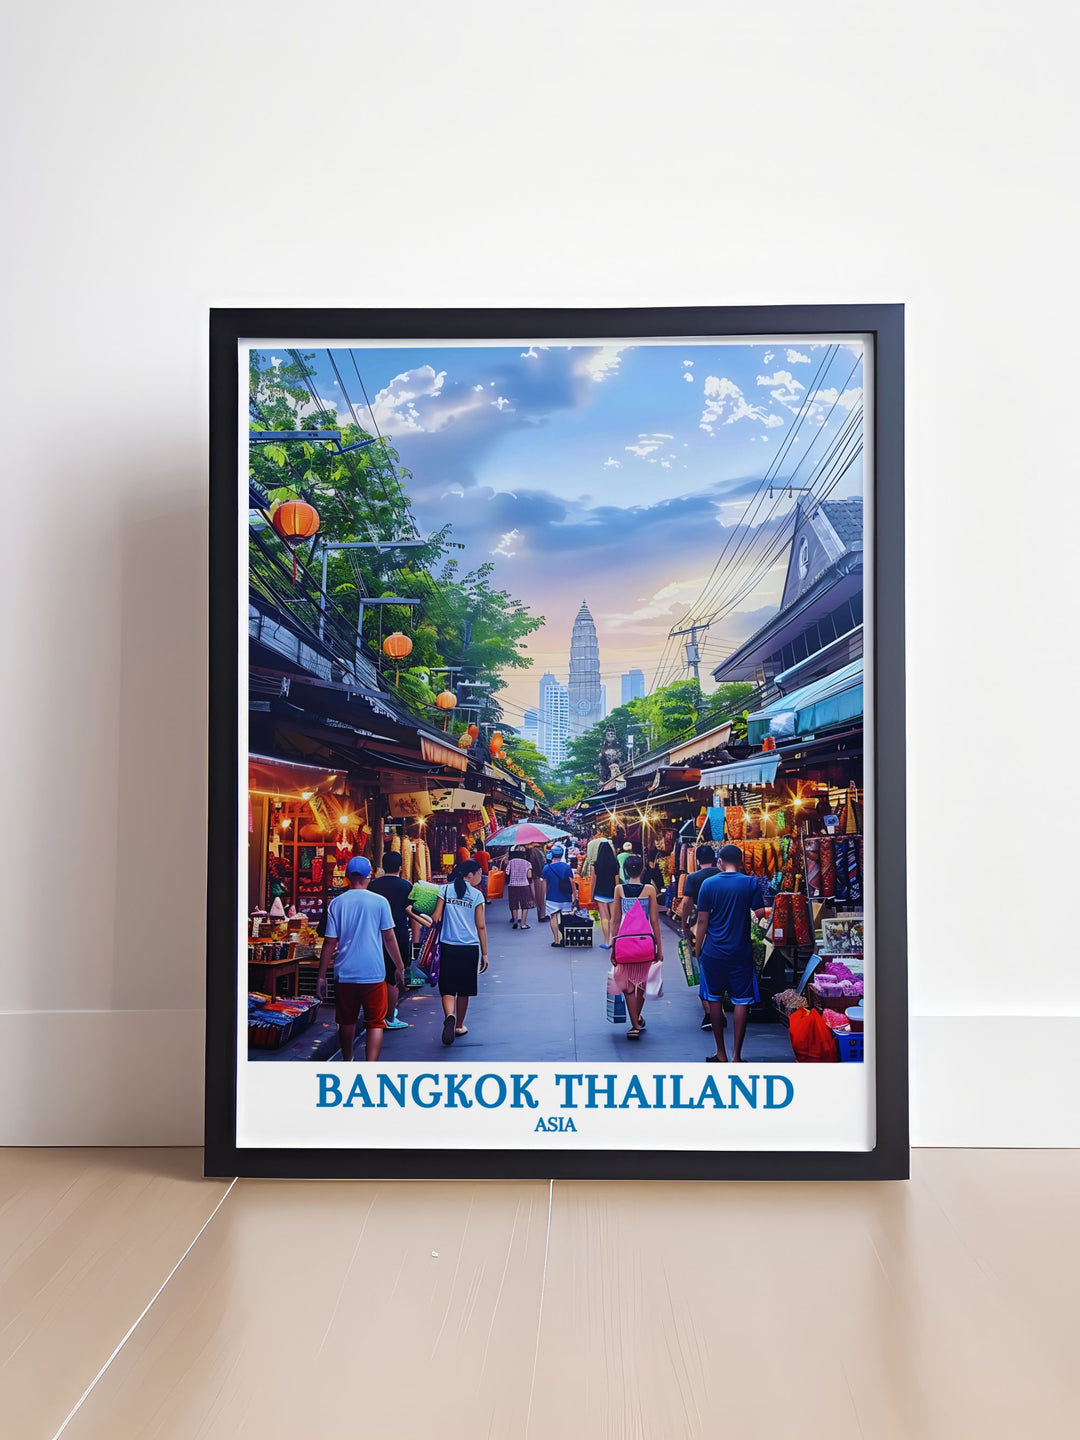 Fine art print capturing the intricate architecture of a Bangkok temple against the city skyline, ideal for those who appreciate both spiritual and urban aesthetics.